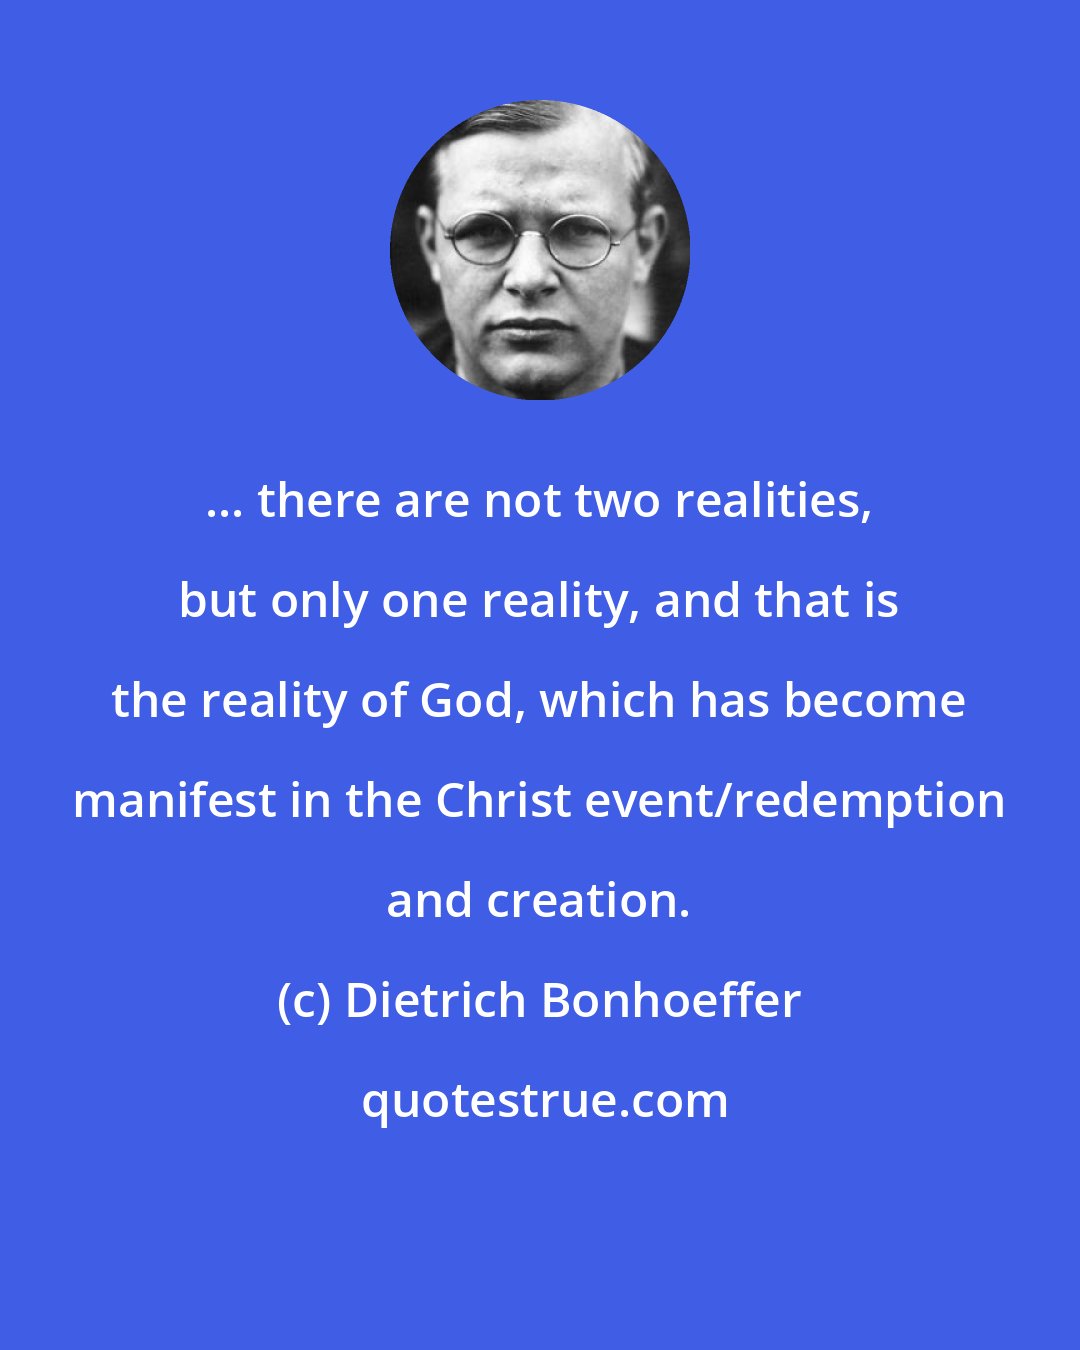 Dietrich Bonhoeffer: ... there are not two realities, but only one reality, and that is the reality of God, which has become manifest in the Christ event/redemption and creation.